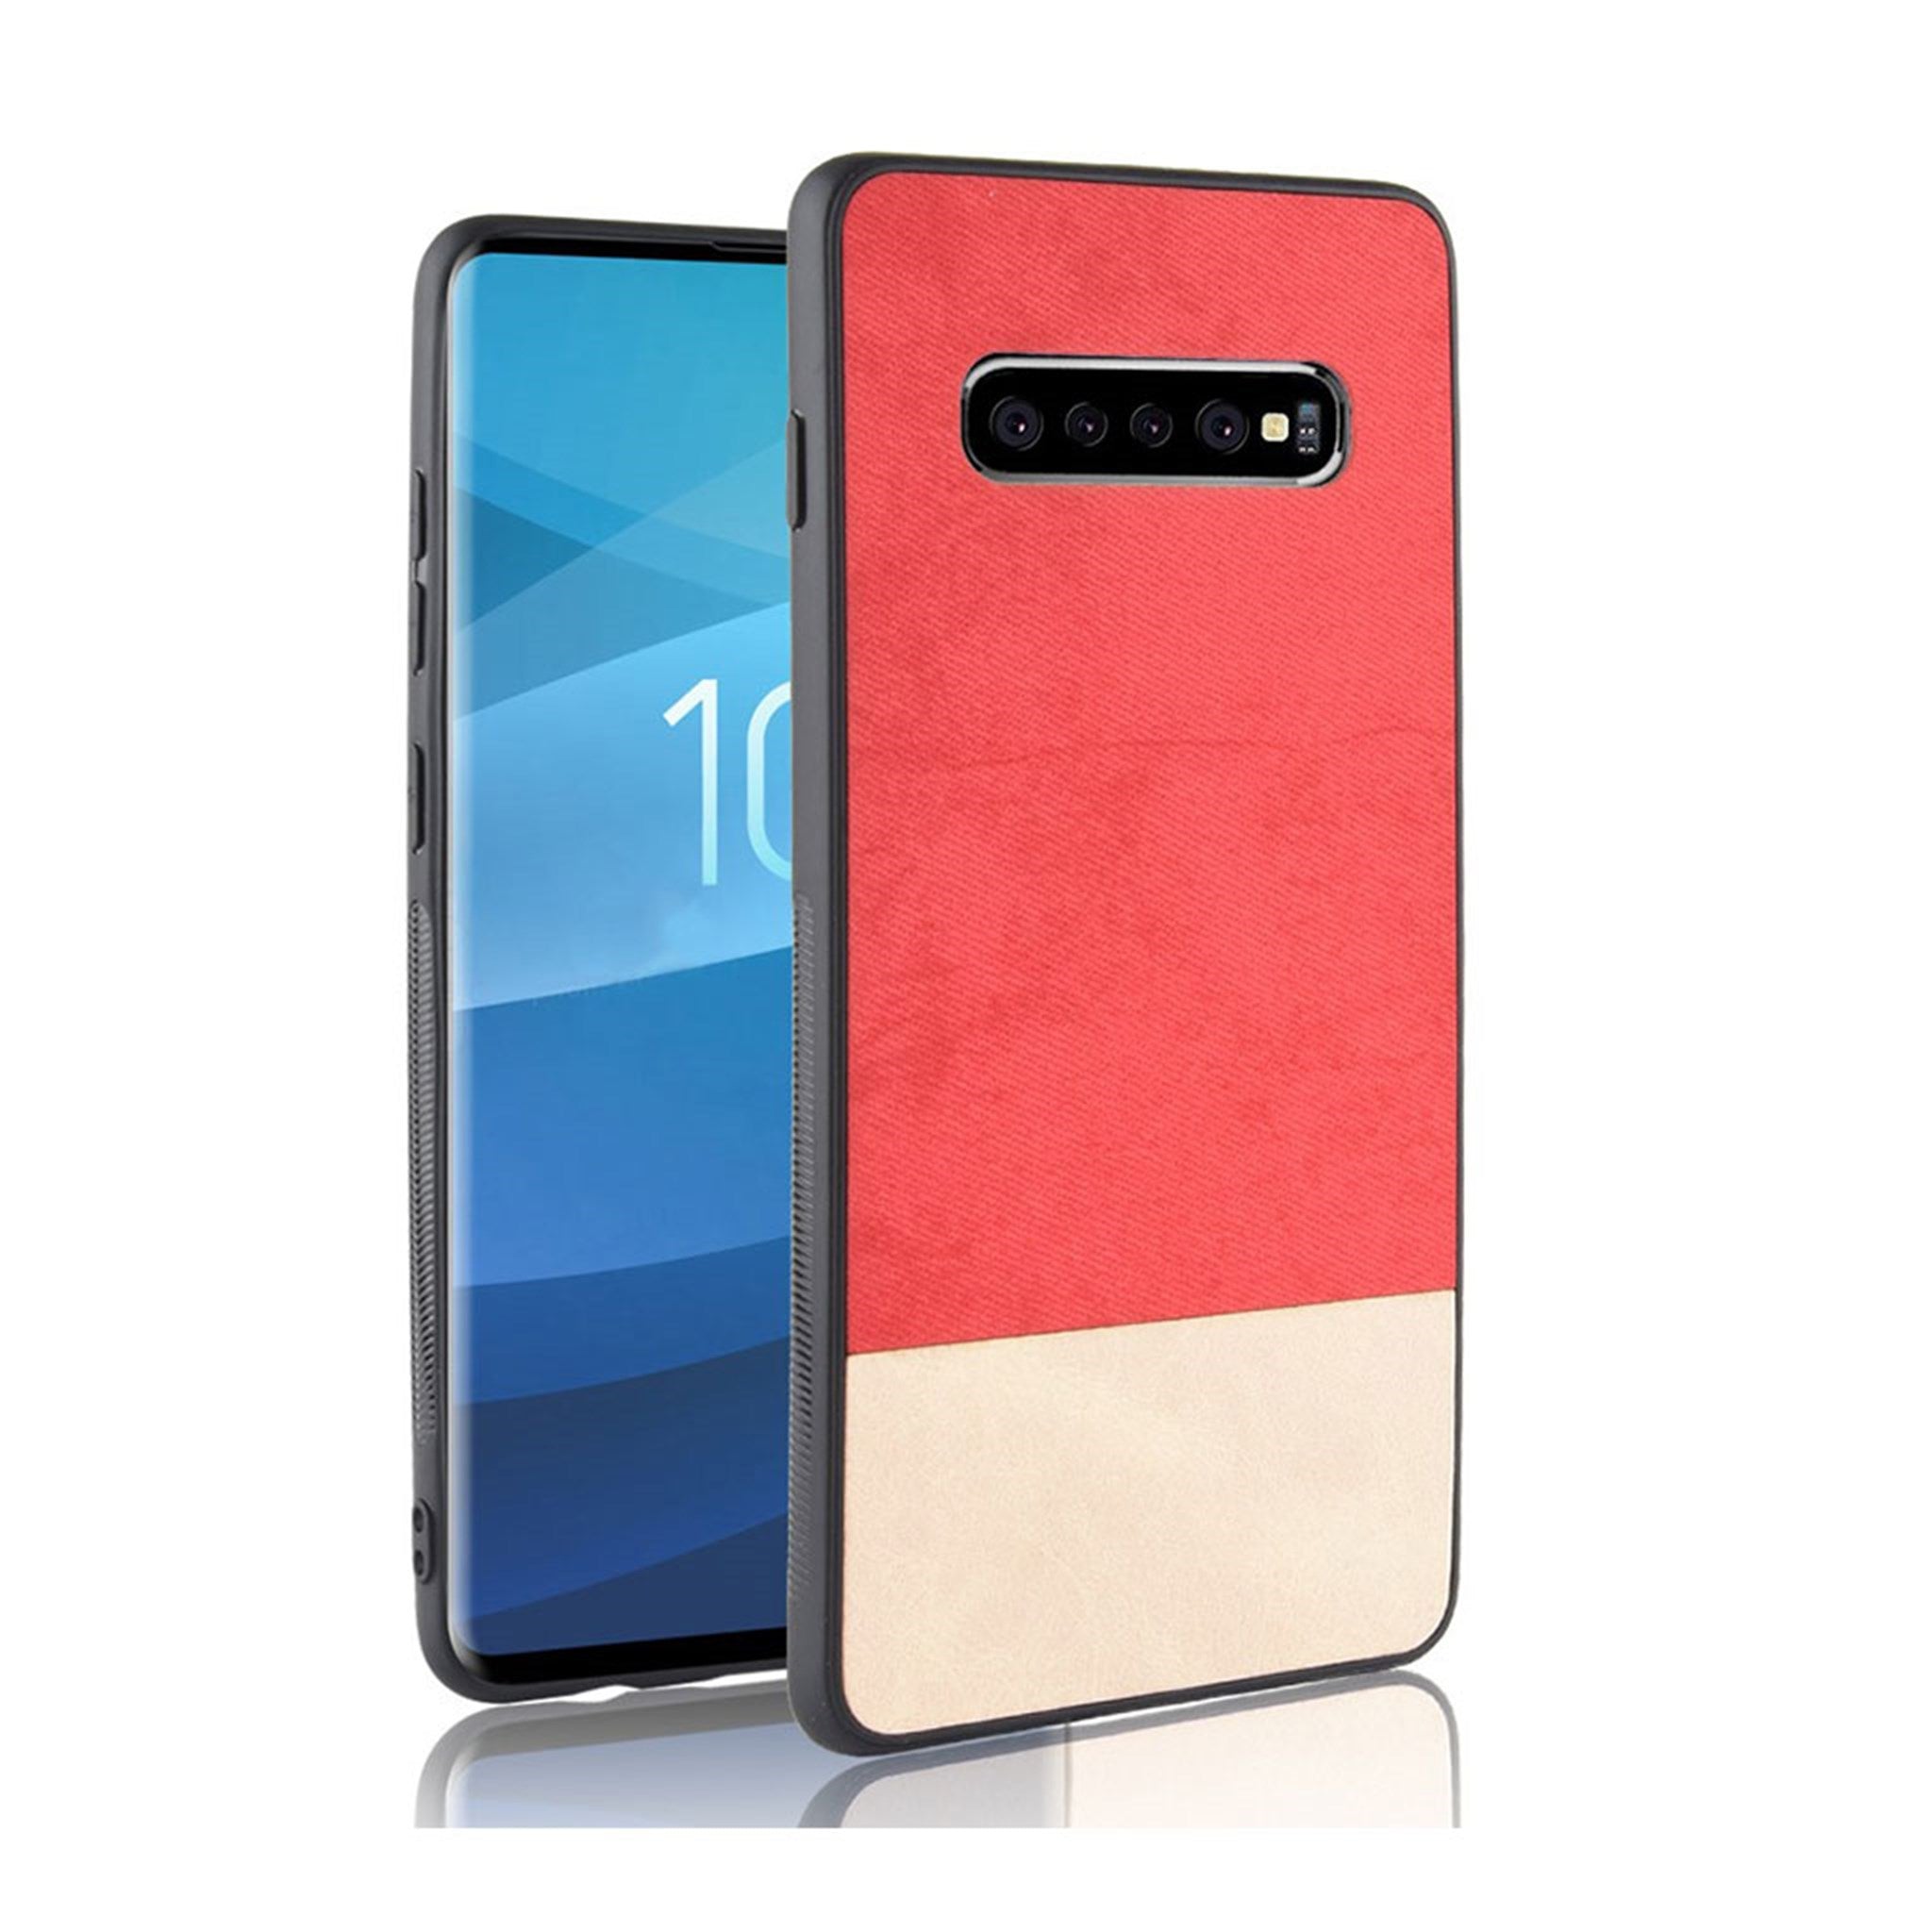 Samsung Galaxy S10 Plus two-tone hybrid leather case - Red